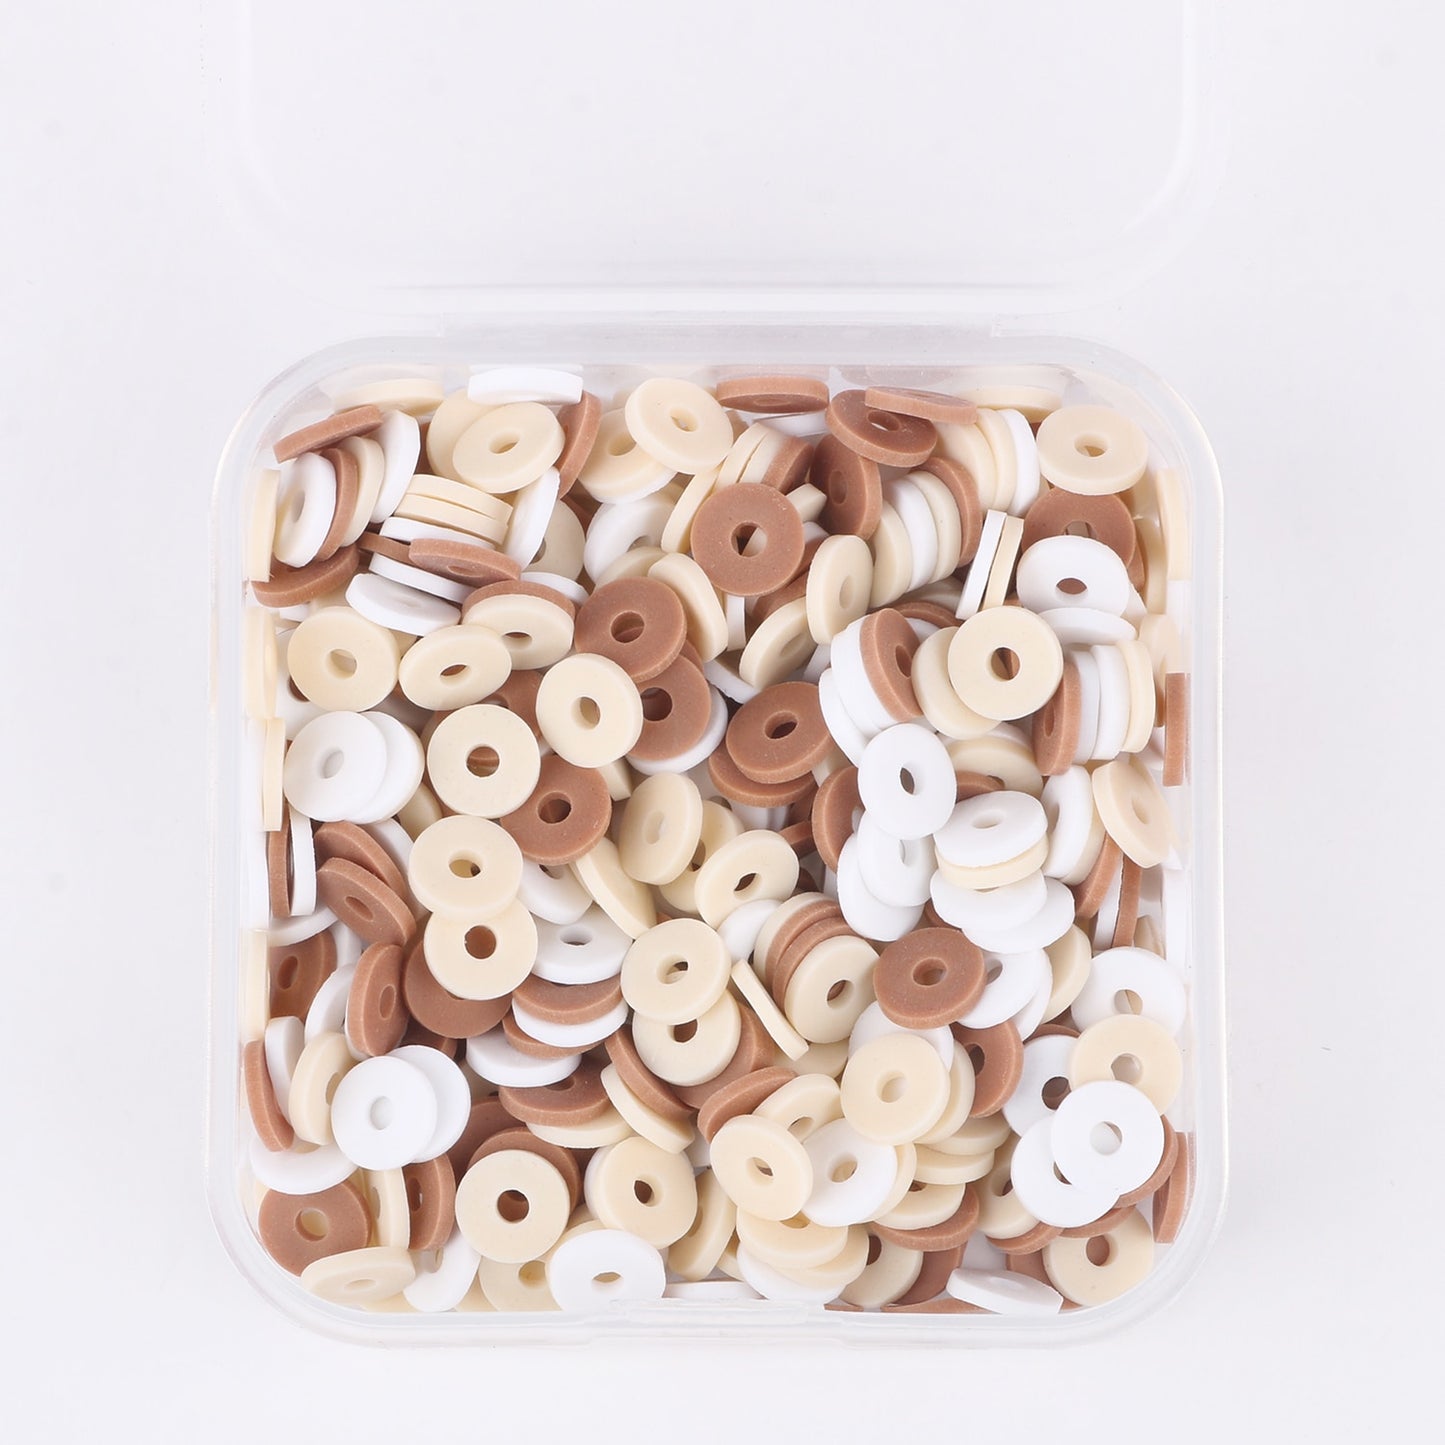 500Pcs/Box 6mm Recyclable Polymer Clay Disc Loose Charms Beads Boho 34 Colors Wristband Handmade Spacer Beads For Jewelry Making